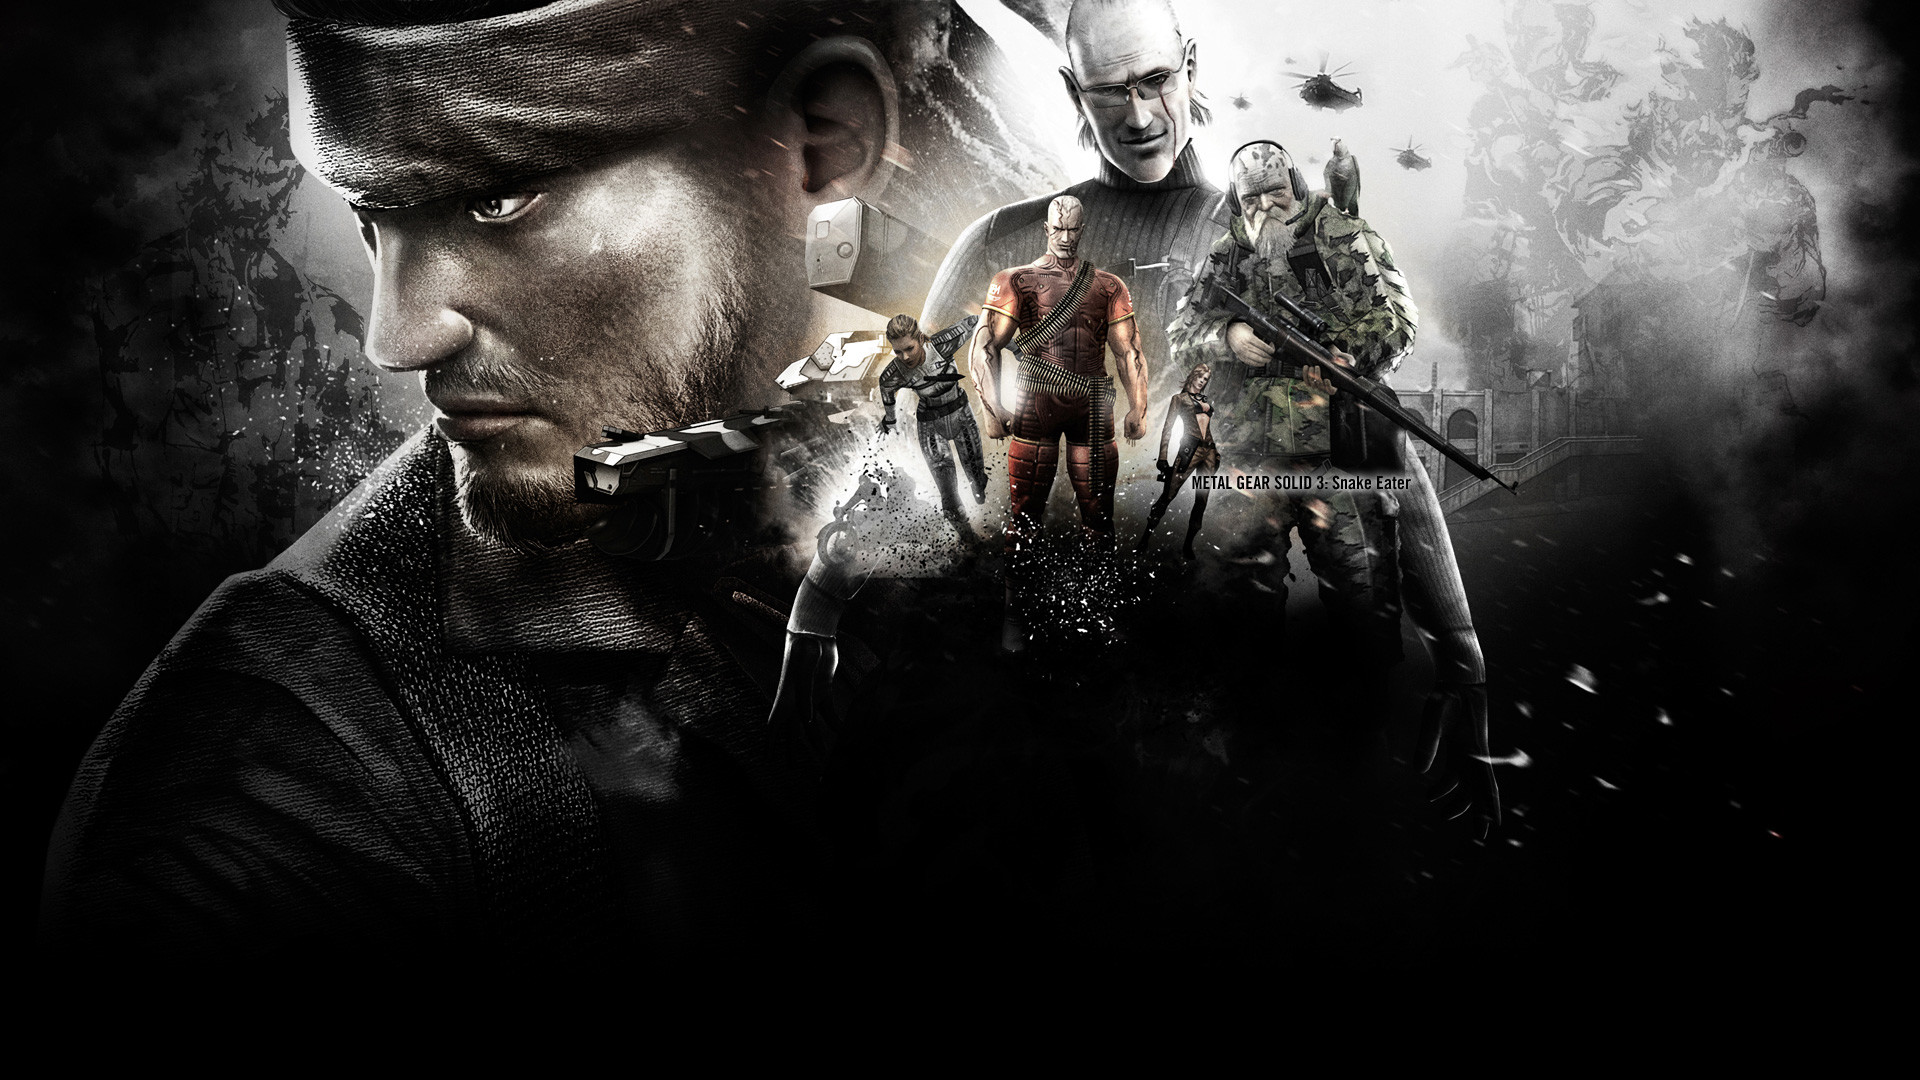 Mgs5 Iphone Wallpaper 75 Images